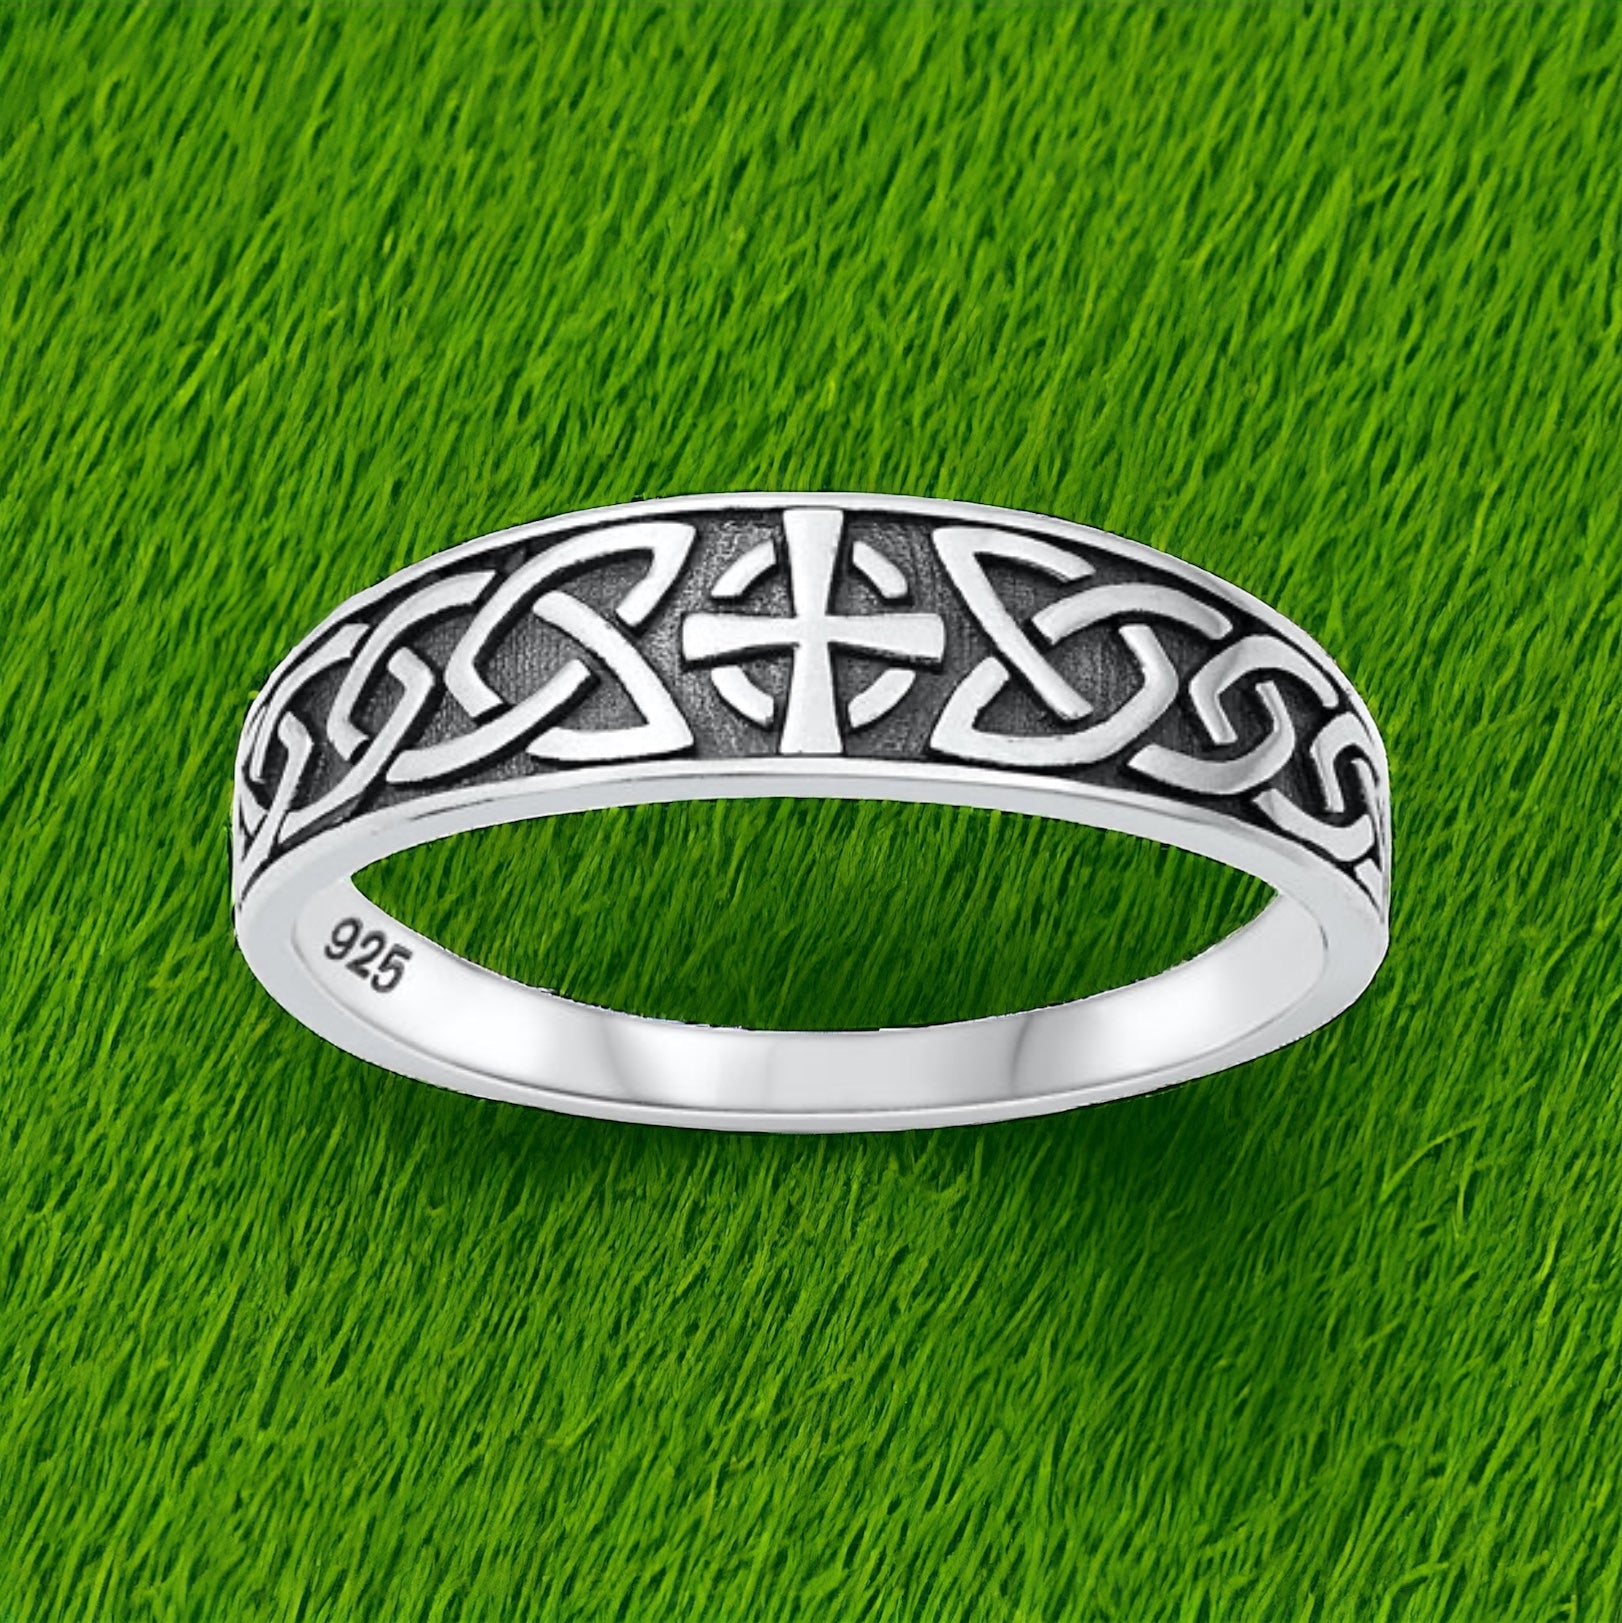 Sterling Silver Celtic Cross Solid Band